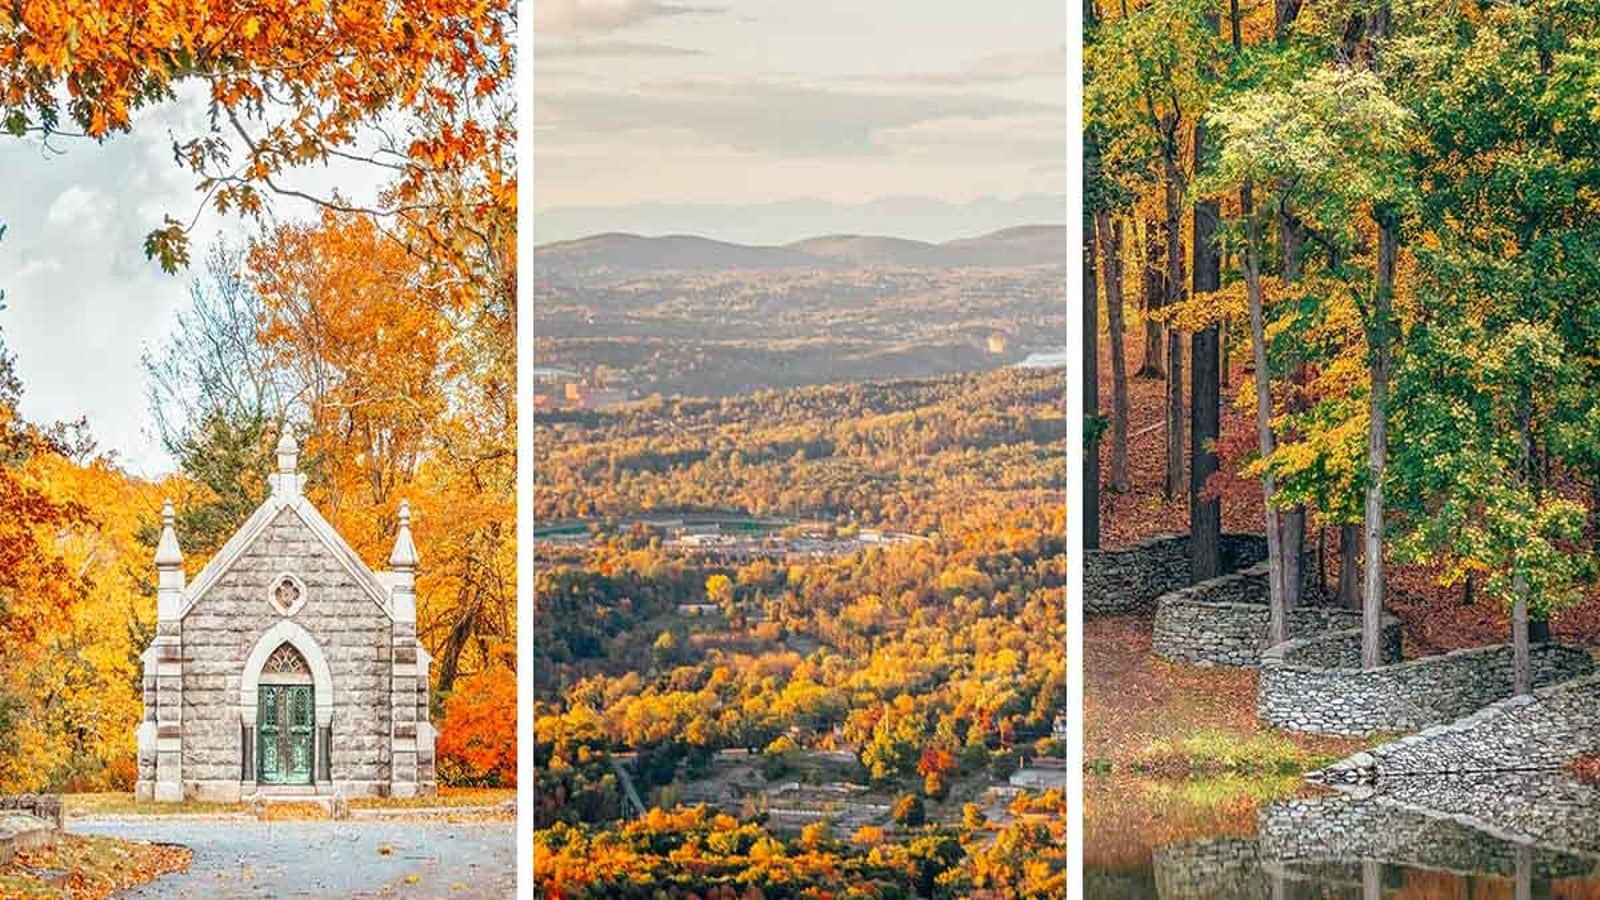 Discover Hudson Valley's charm with these activities